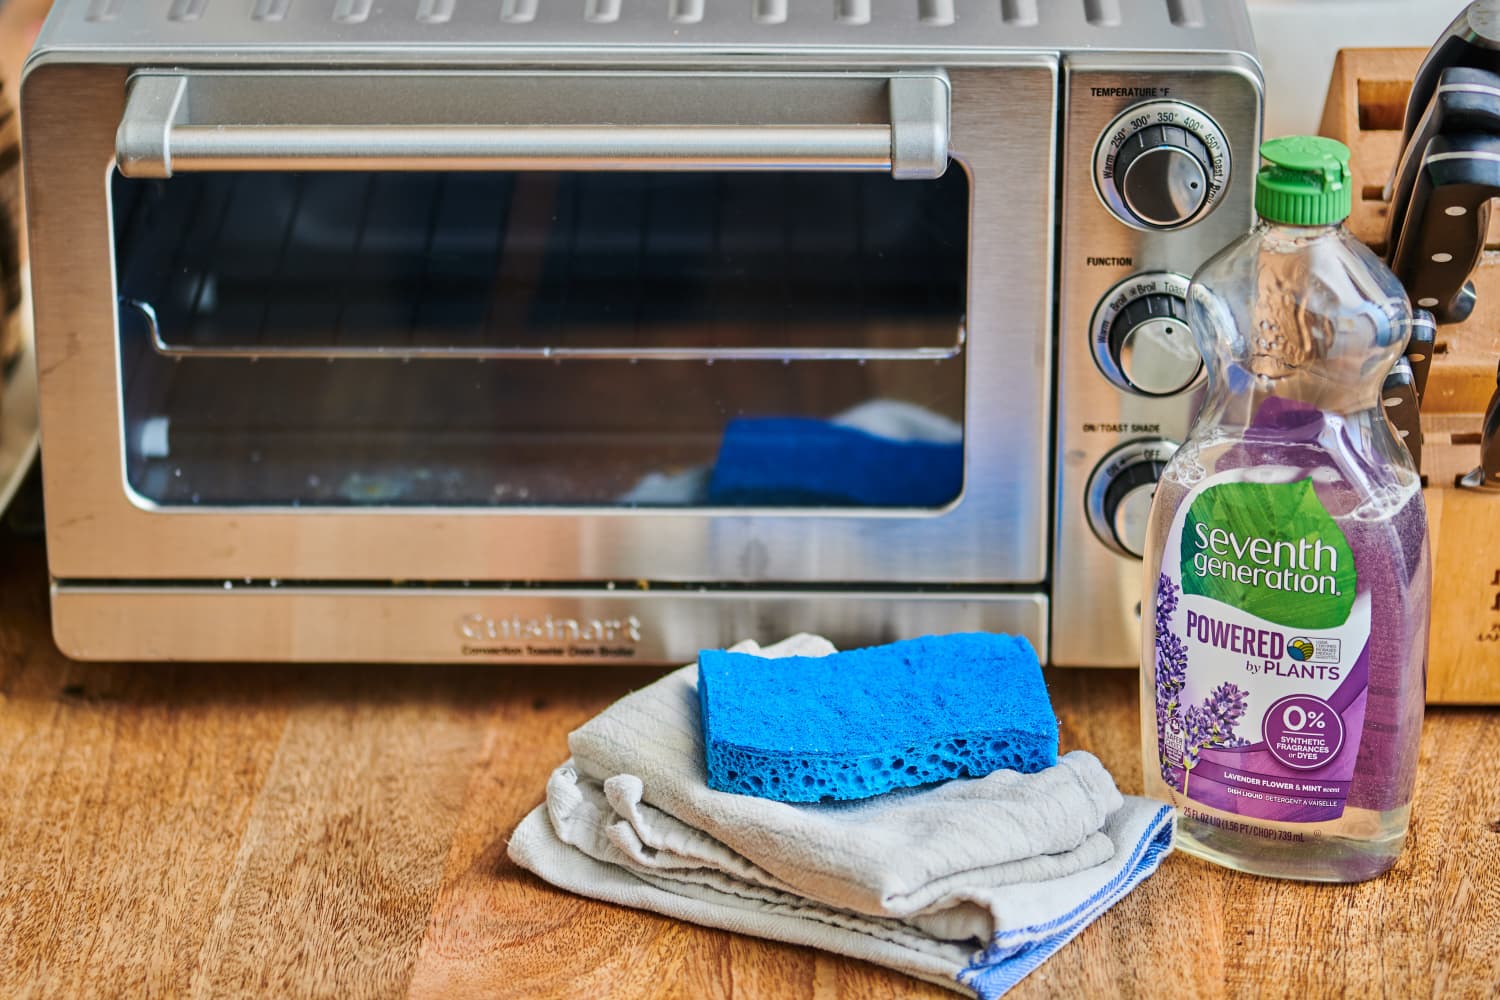 How to Clean Toaster Oven Tray: Easy and Effective Cleaning Hacks